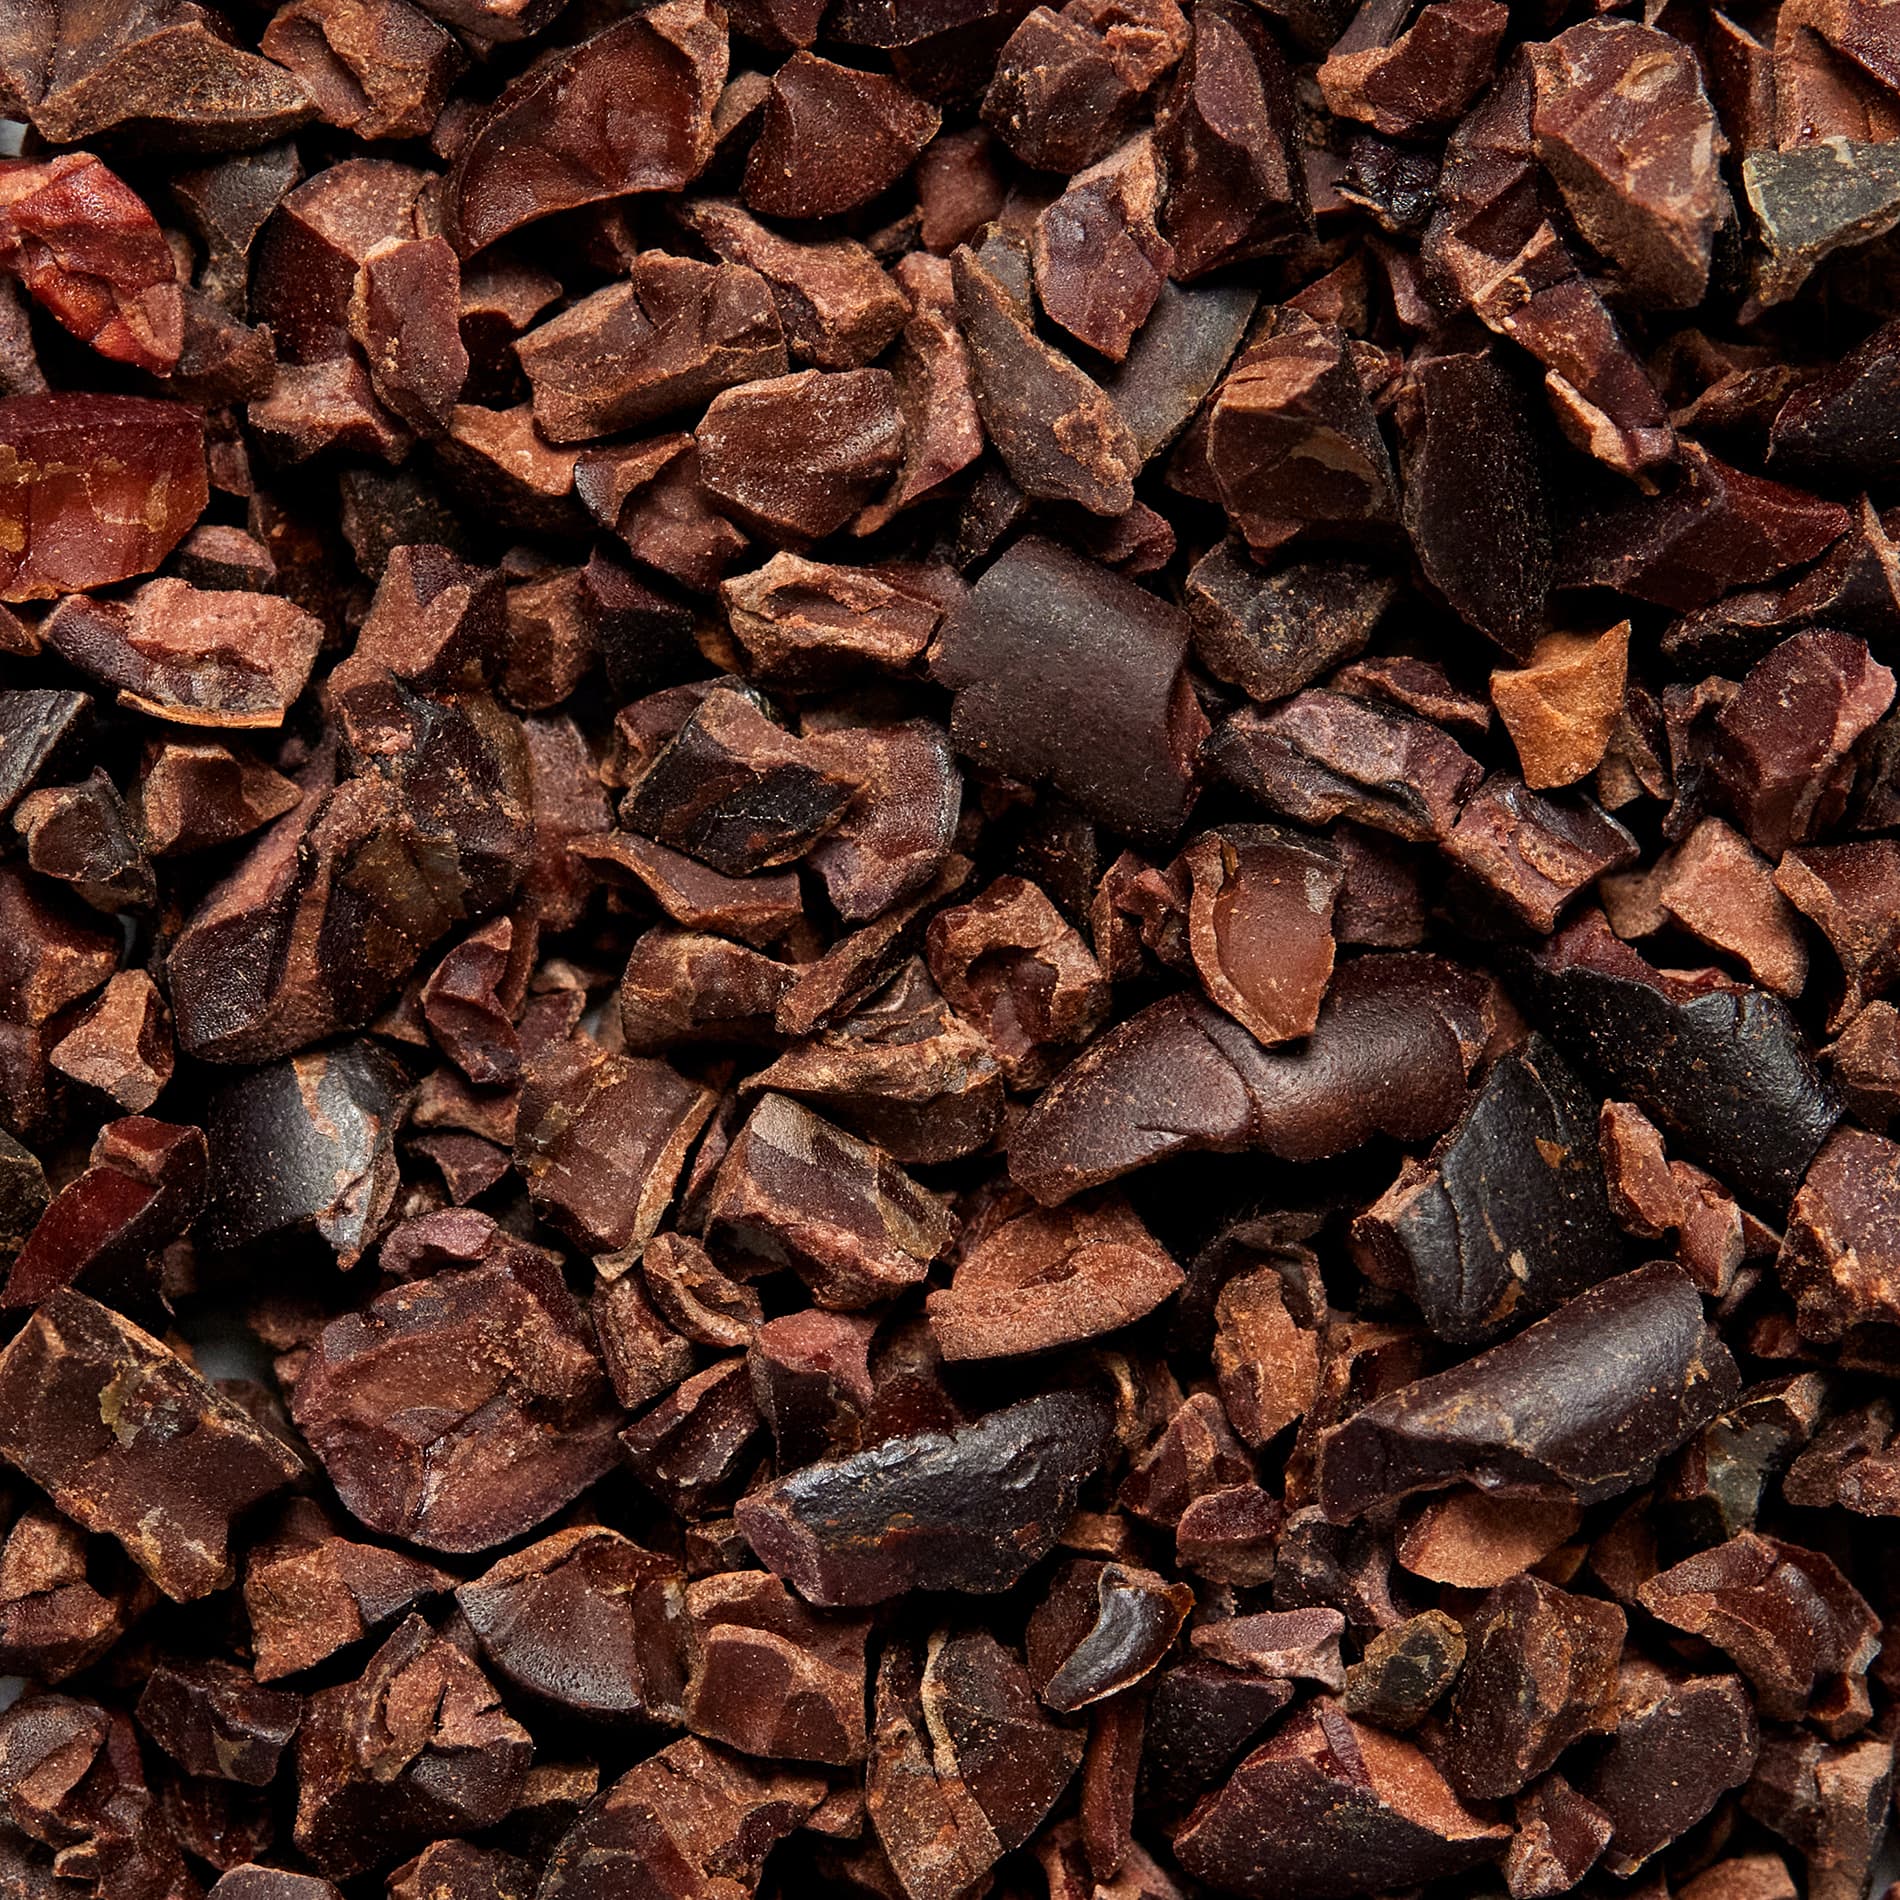 100% Roasted Cacao Nibs